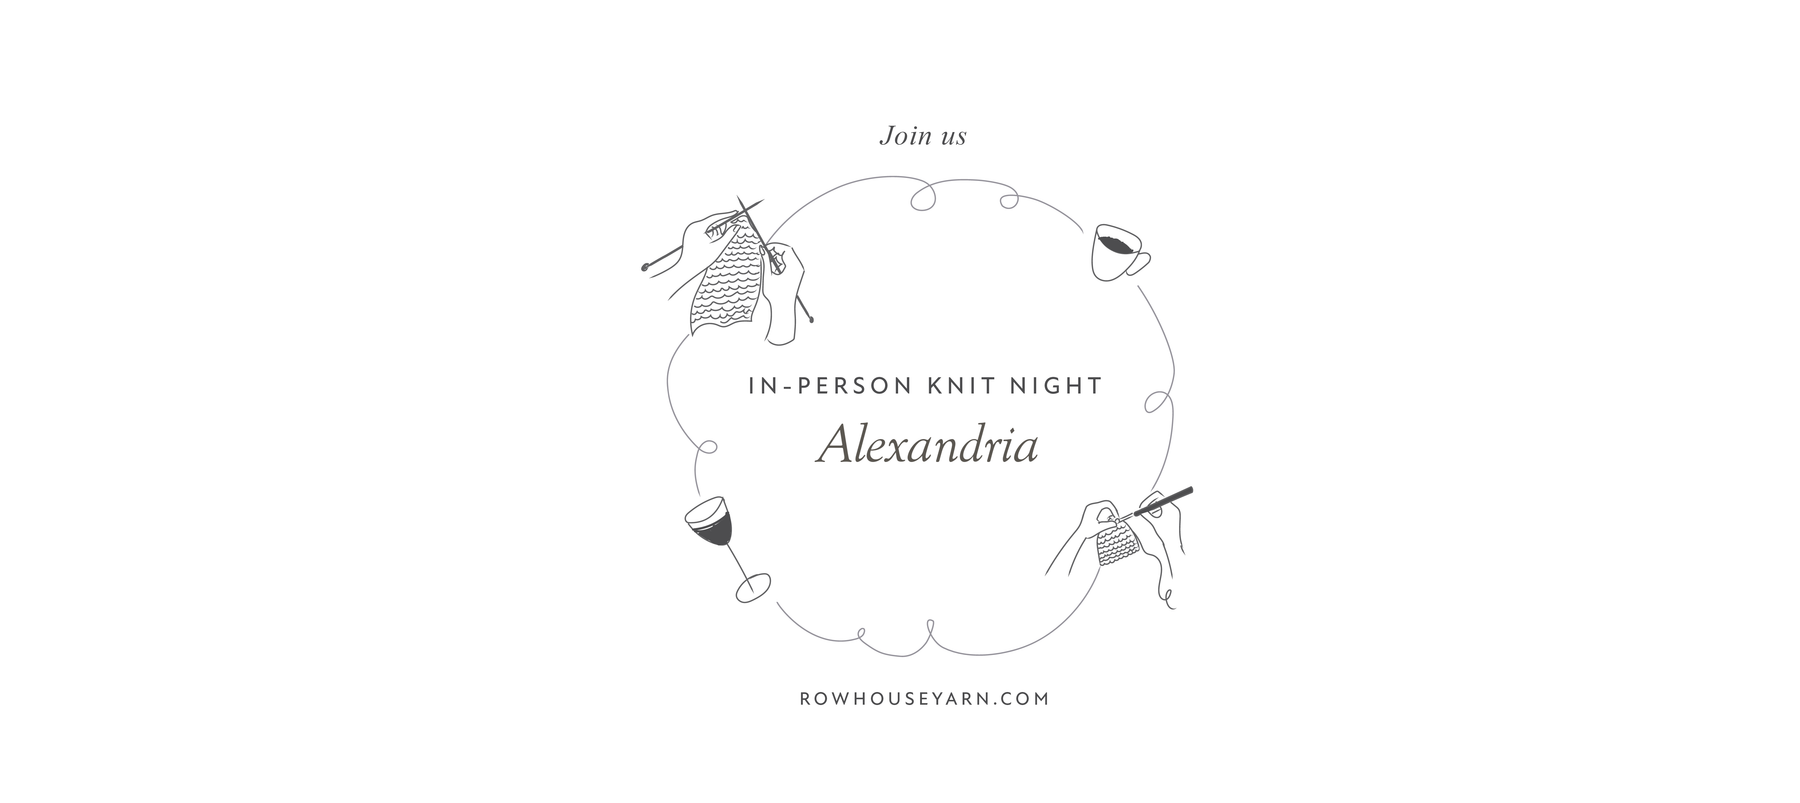 Join us for the Knit (or Crochet) Night in Alexandria VA on March 4th!